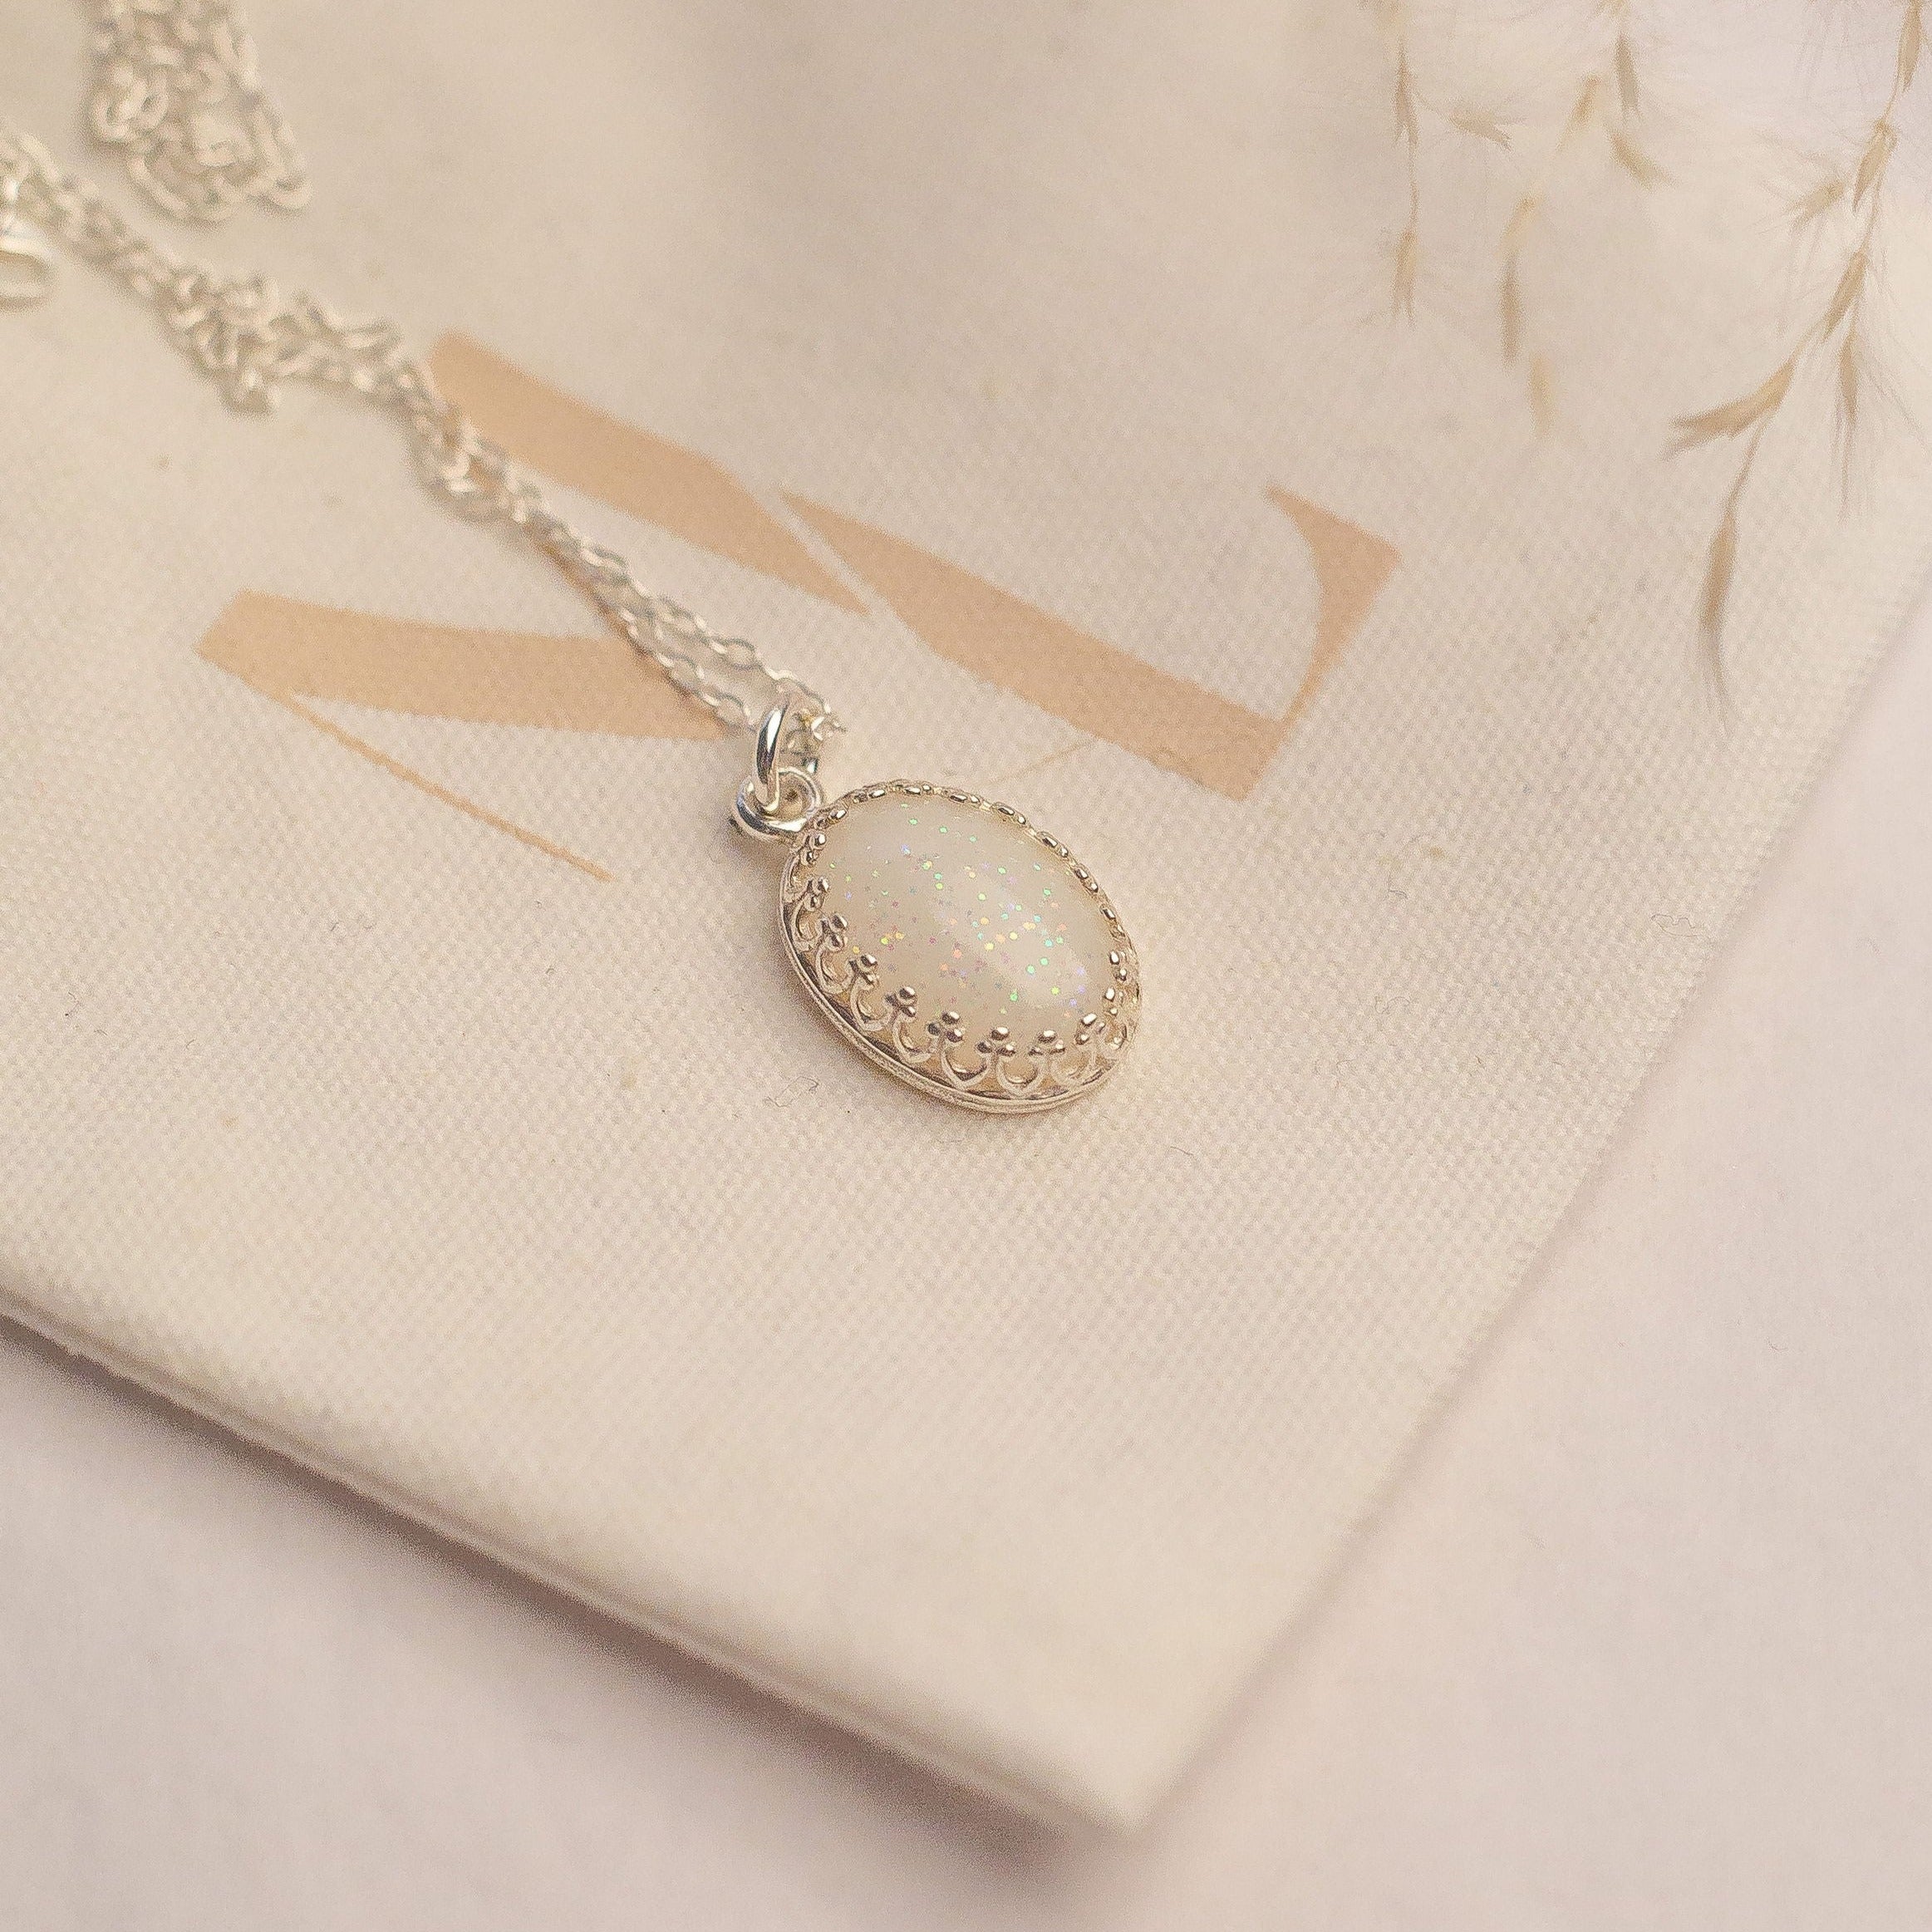 Breastmilk Oval Crown Necklace Pendant